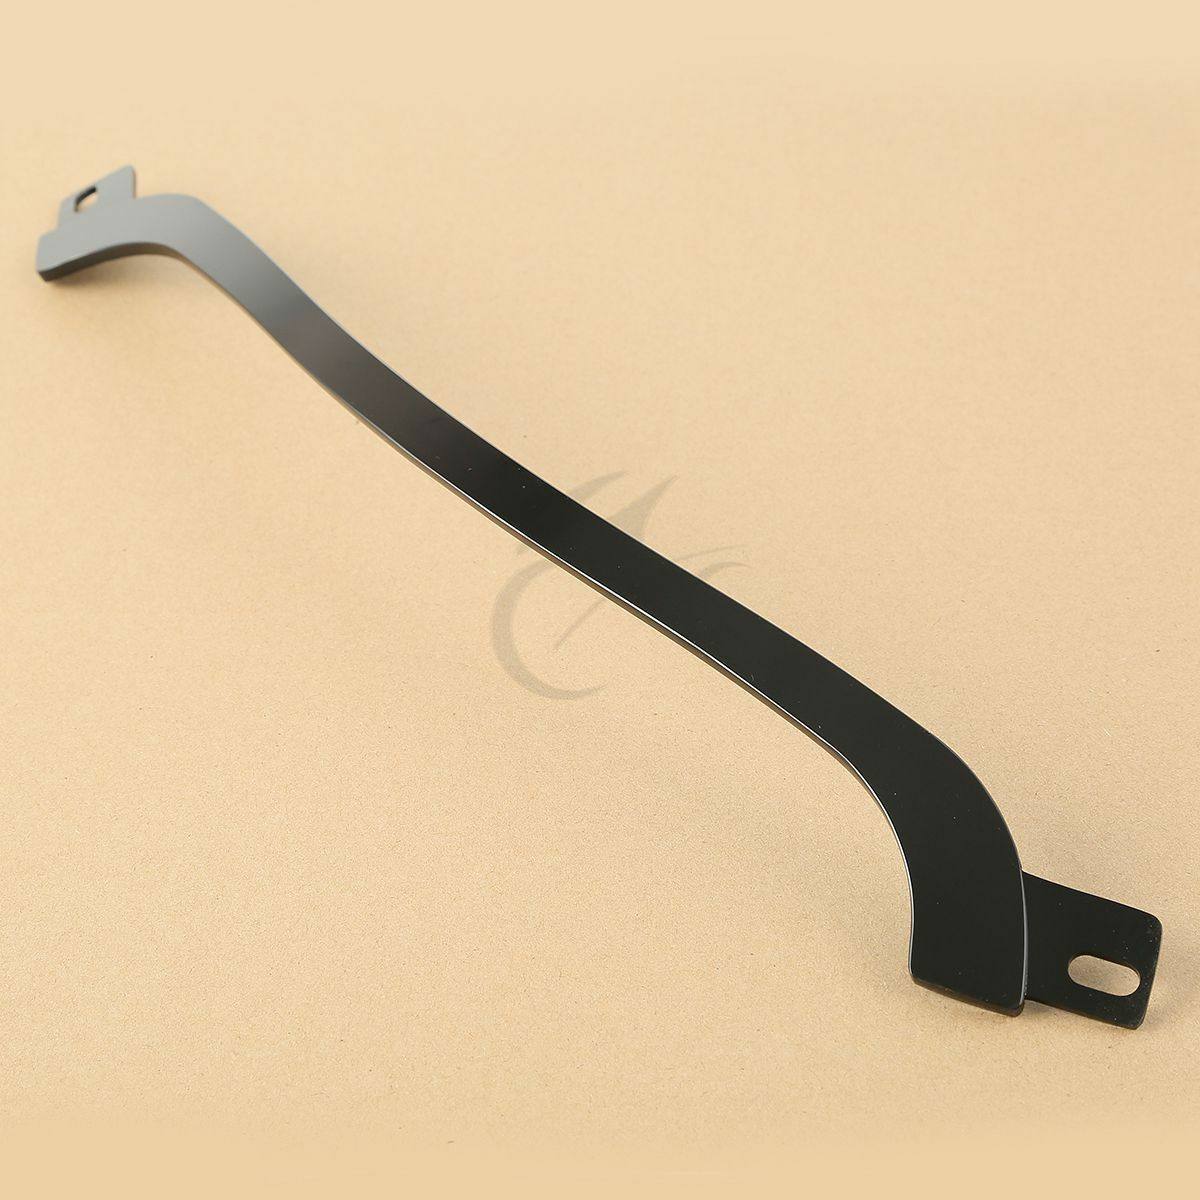 Windshield Windscreen Trim Fit For Harley Touring Road Glide 2015-2021 15-21 US - Moto Life Products